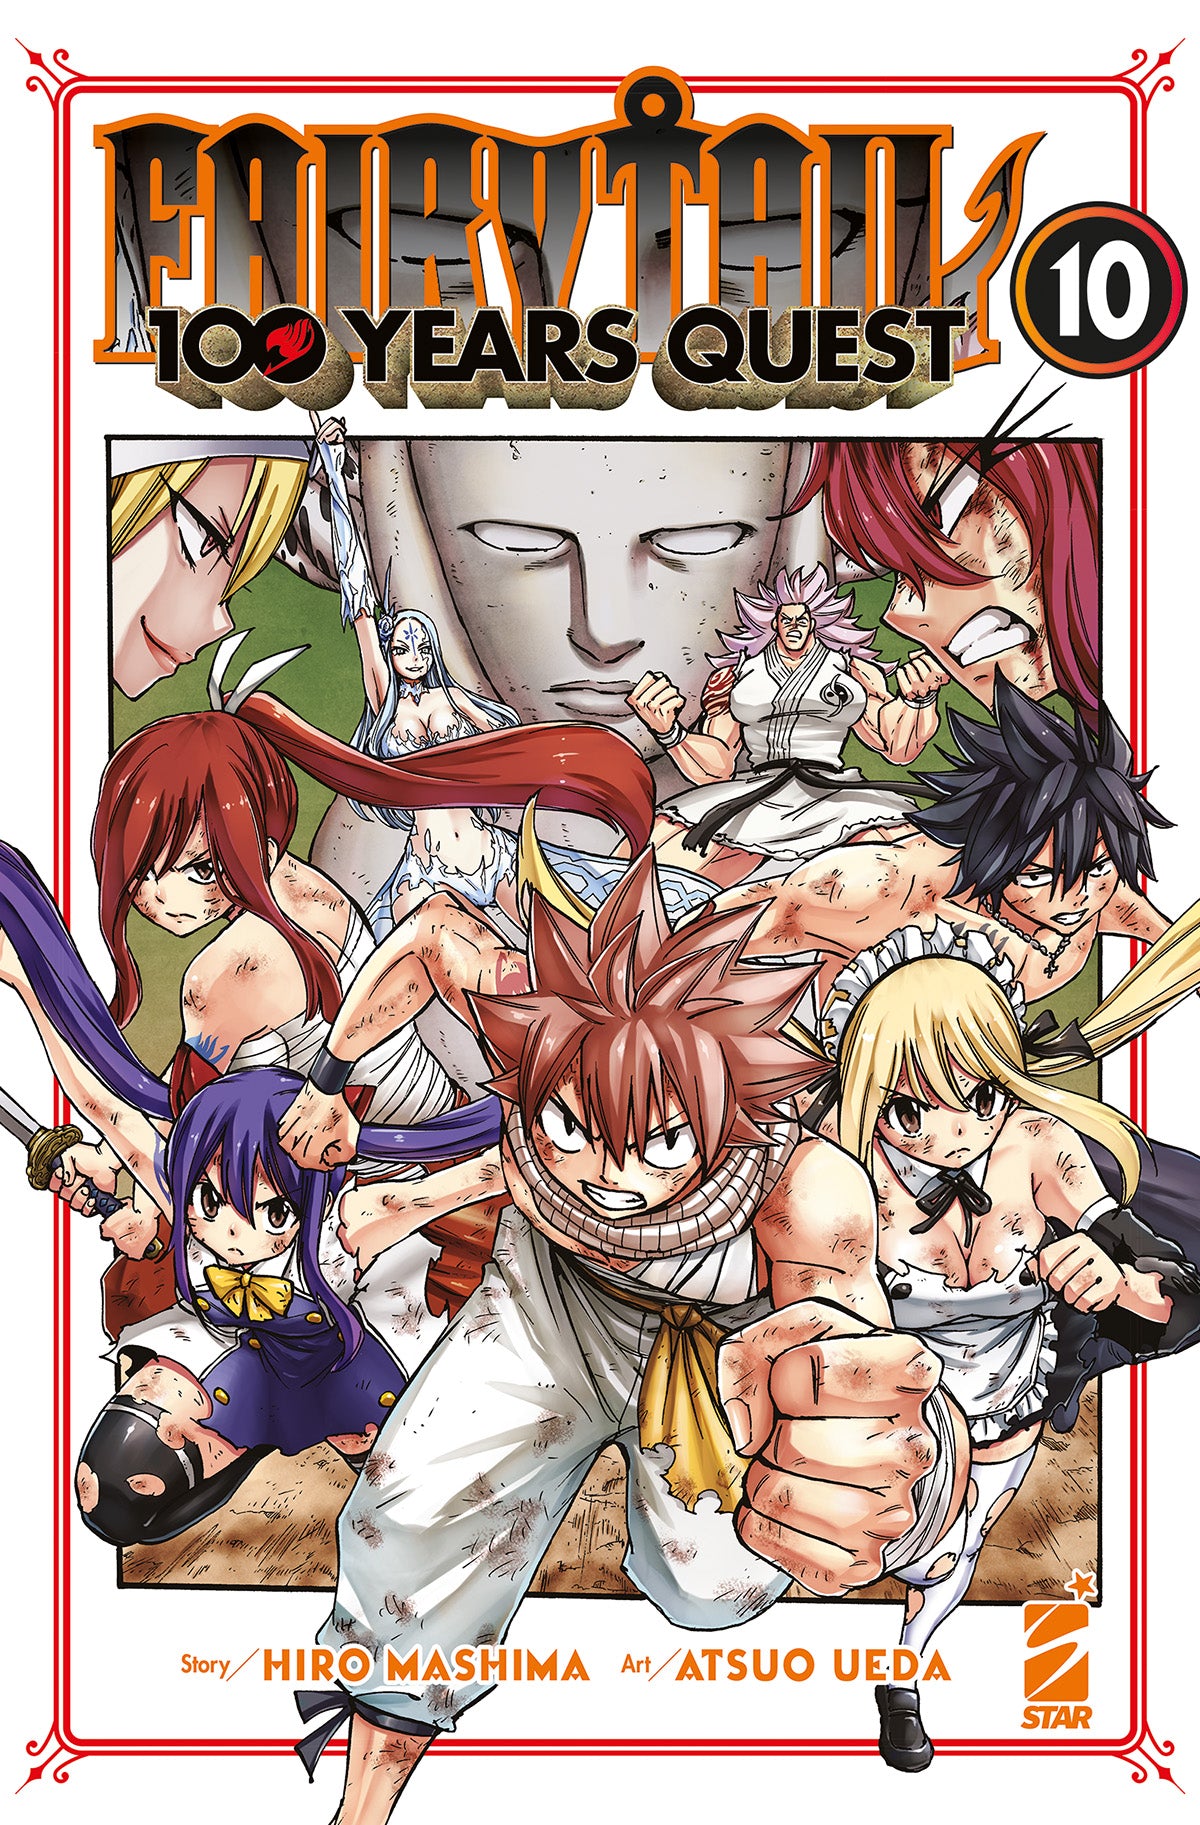 Fairy Tail - 100 Years Quest 10